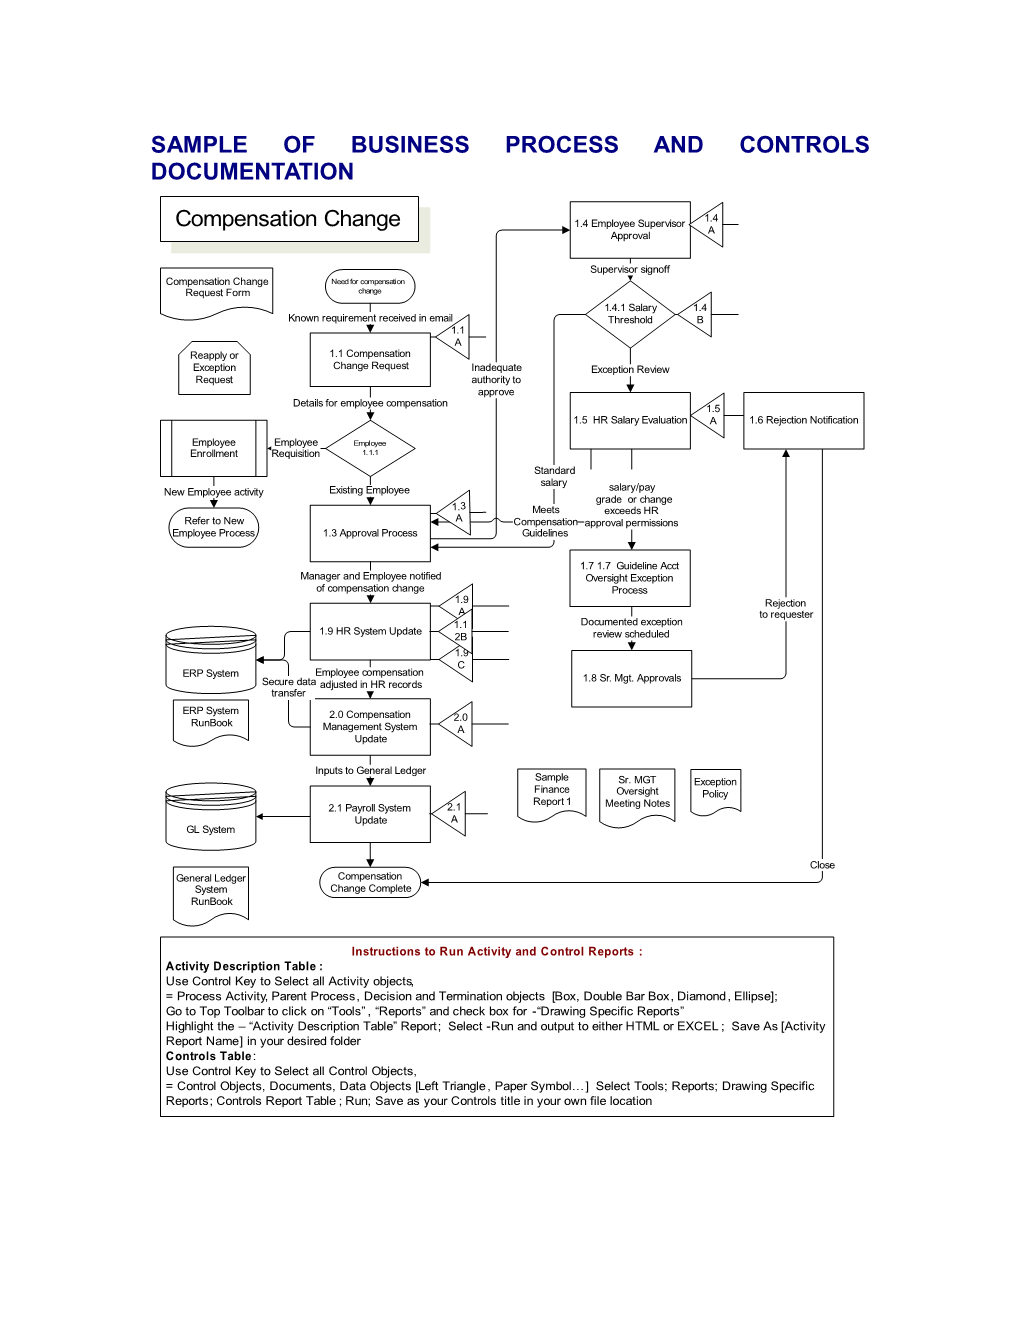 Sample Of Business Process And Controls Documentation